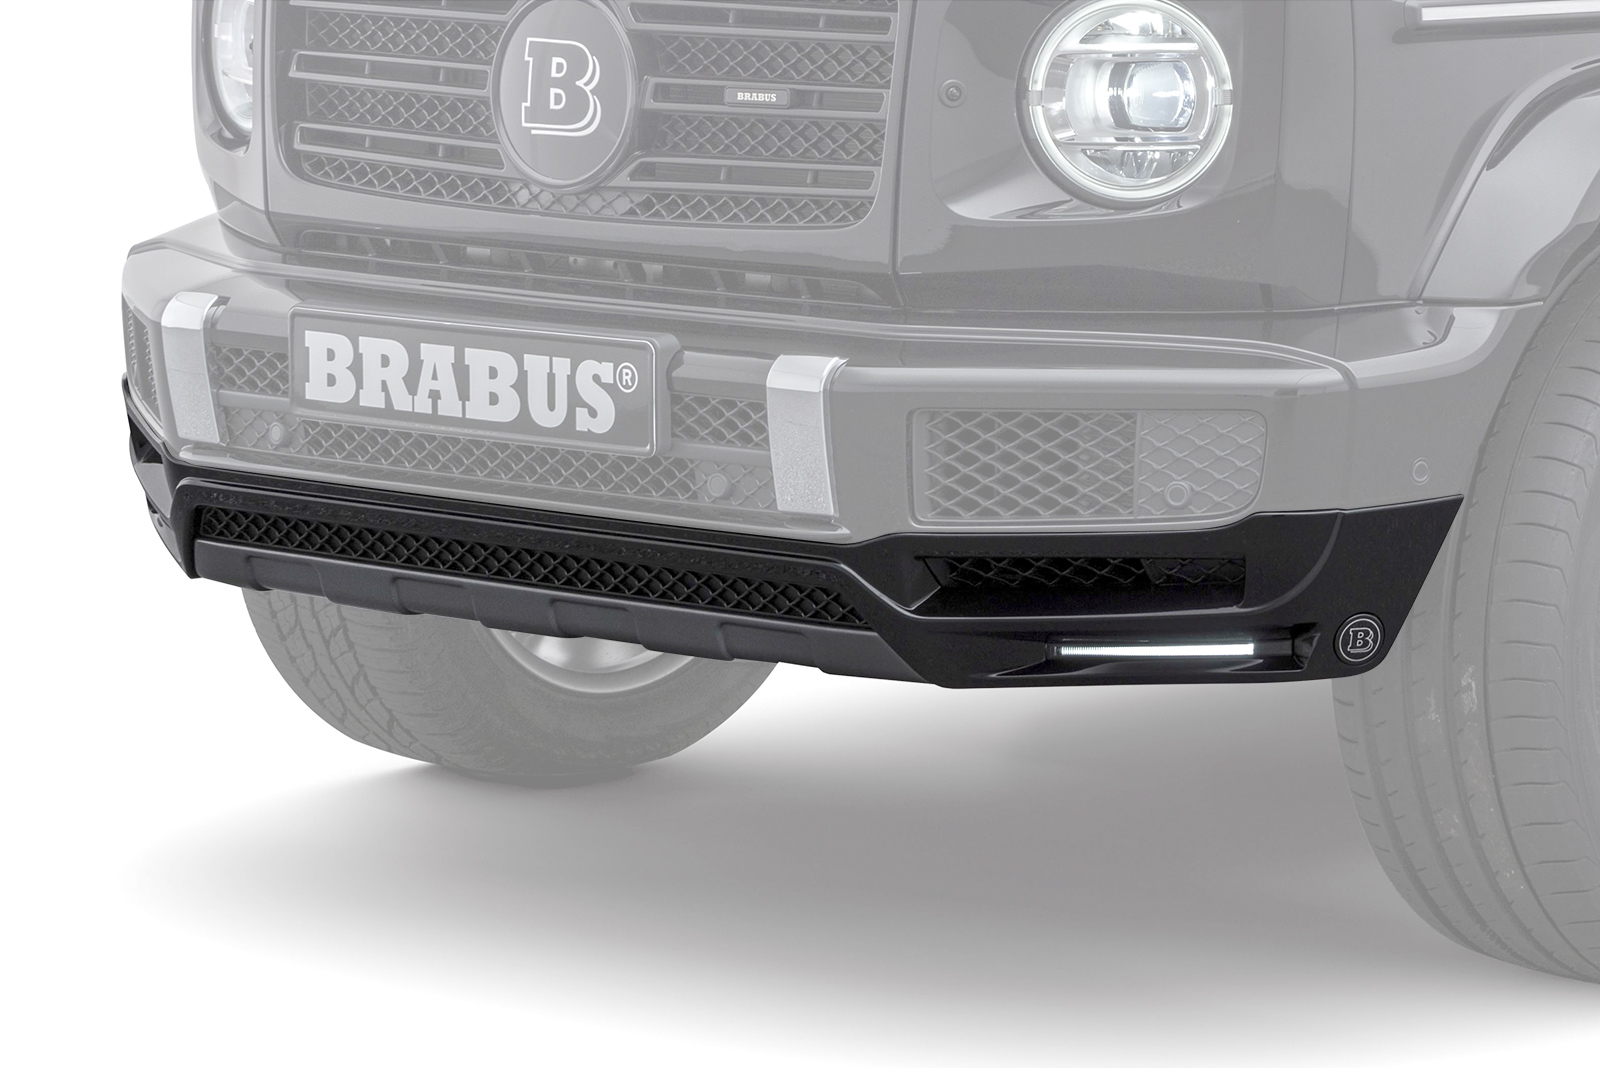 Check price and buy Check price and buy Brabus Carbon Fiber Body kit set for Mercedes G-class W 463A G 350 - G 500